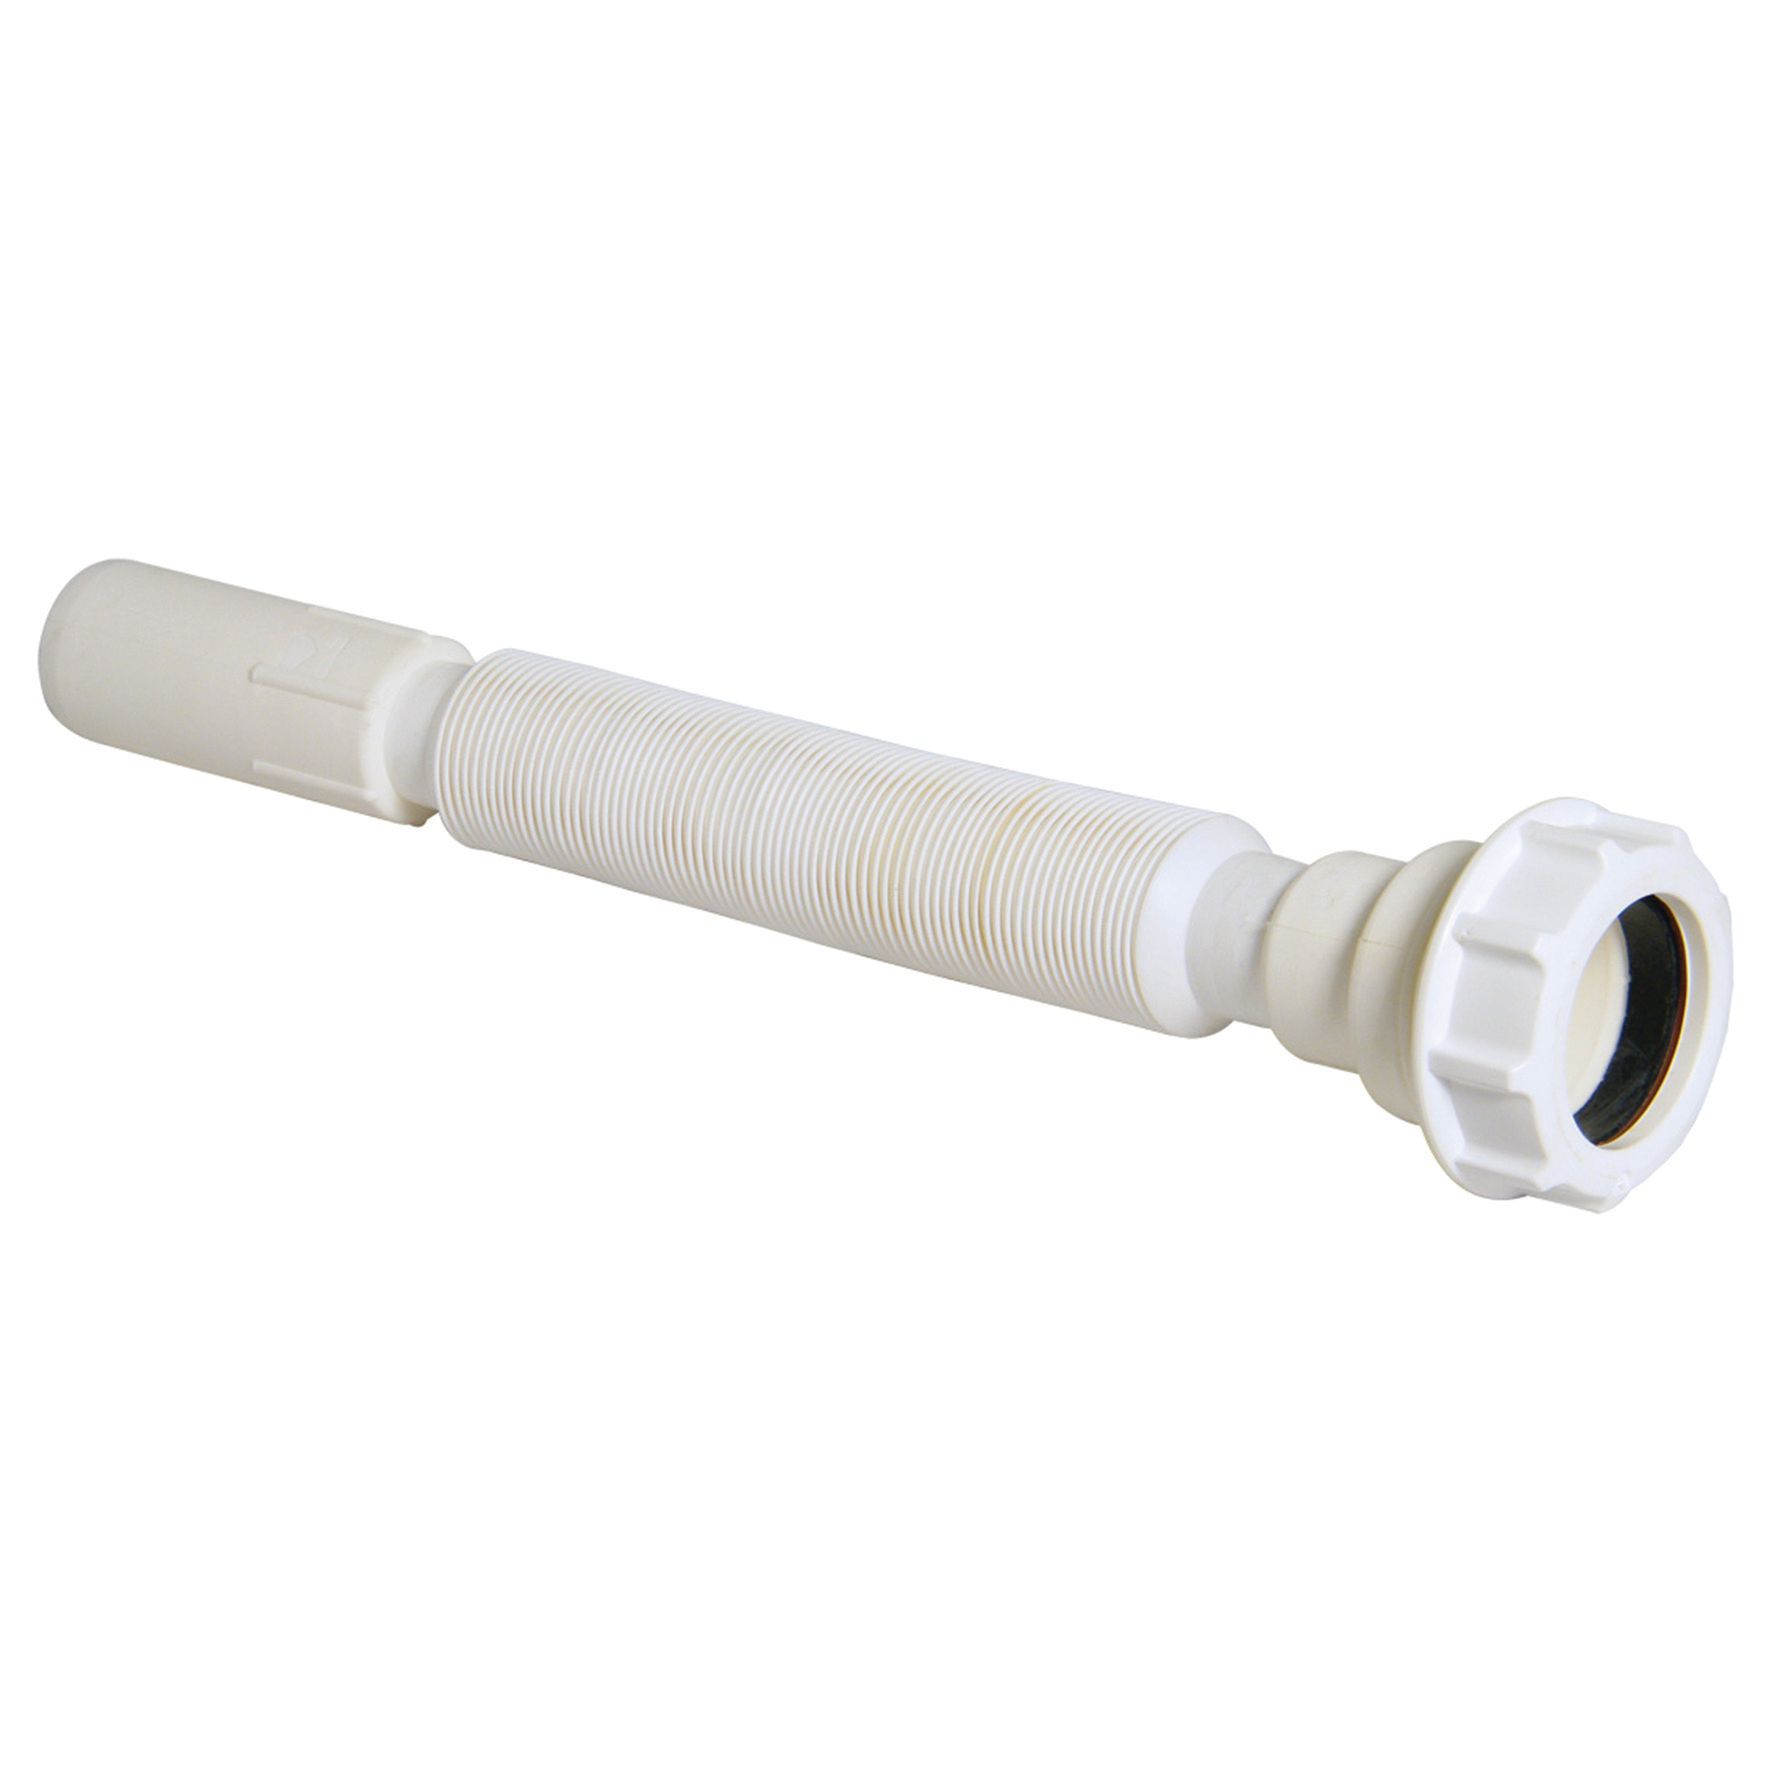 Image of FloPlast FT32 Flexible Waste Pipe - 32mm